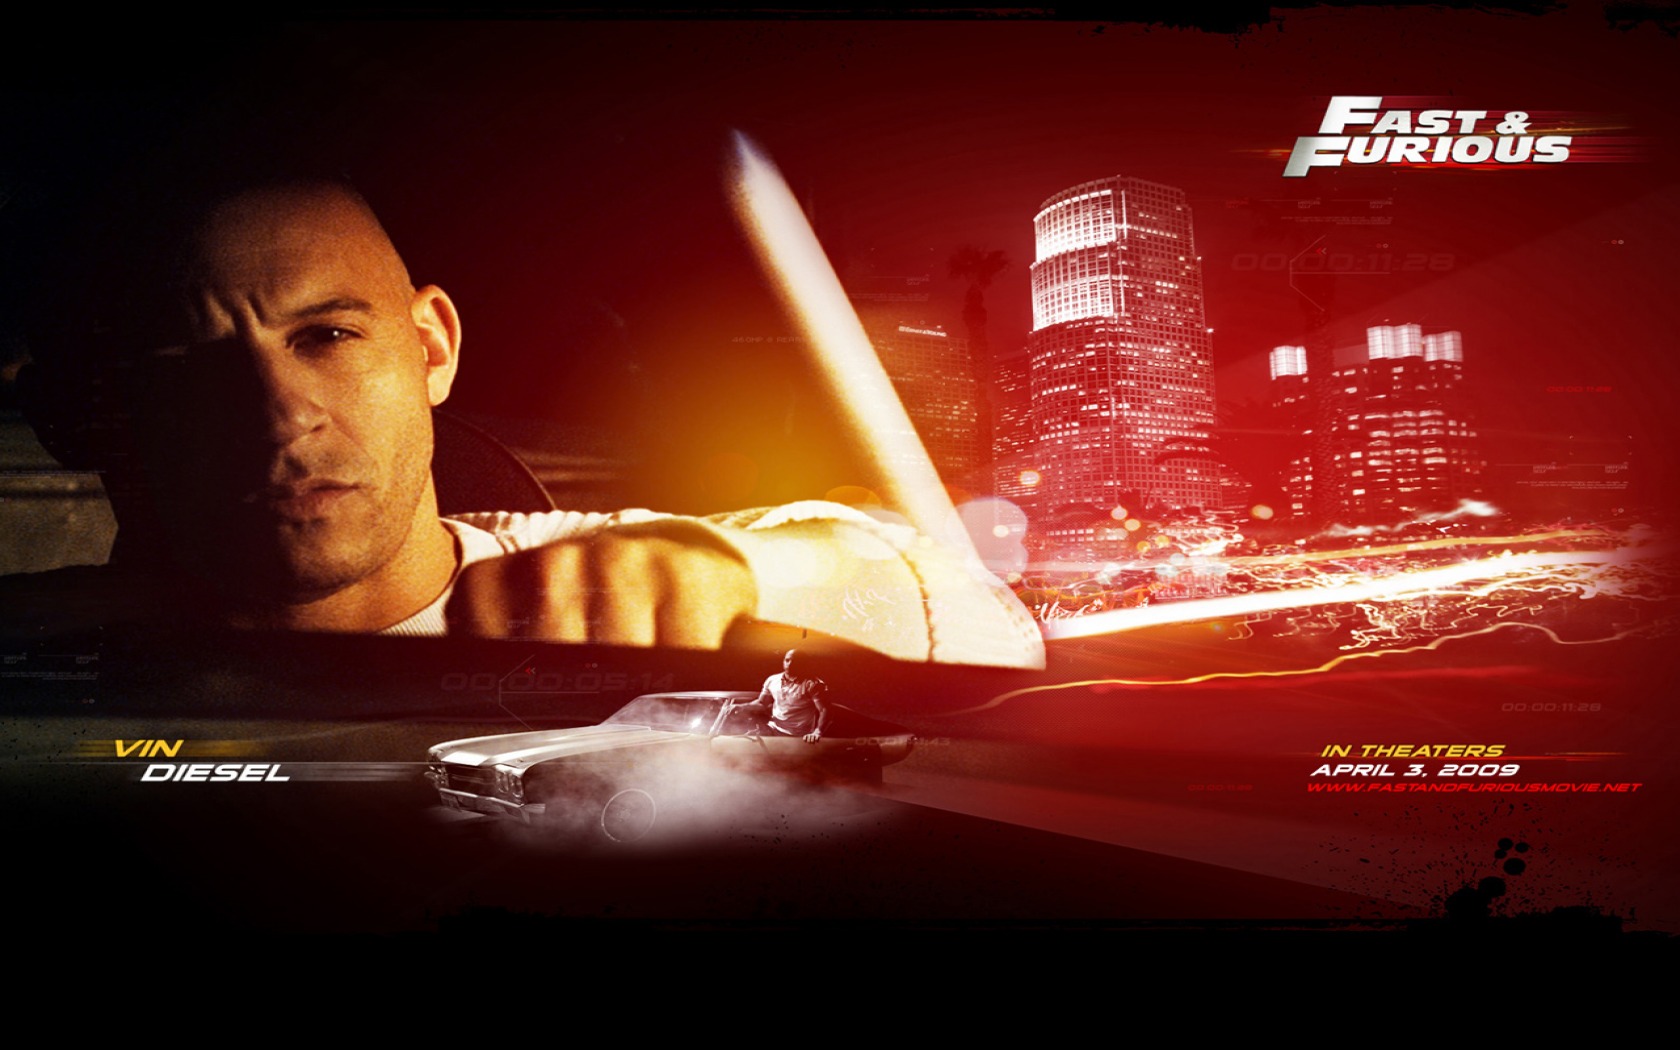 Vin Diesel In Fast Furious Wallpaper Vin Diesel Male - Fast And The Furious 4 Poster - HD Wallpaper 